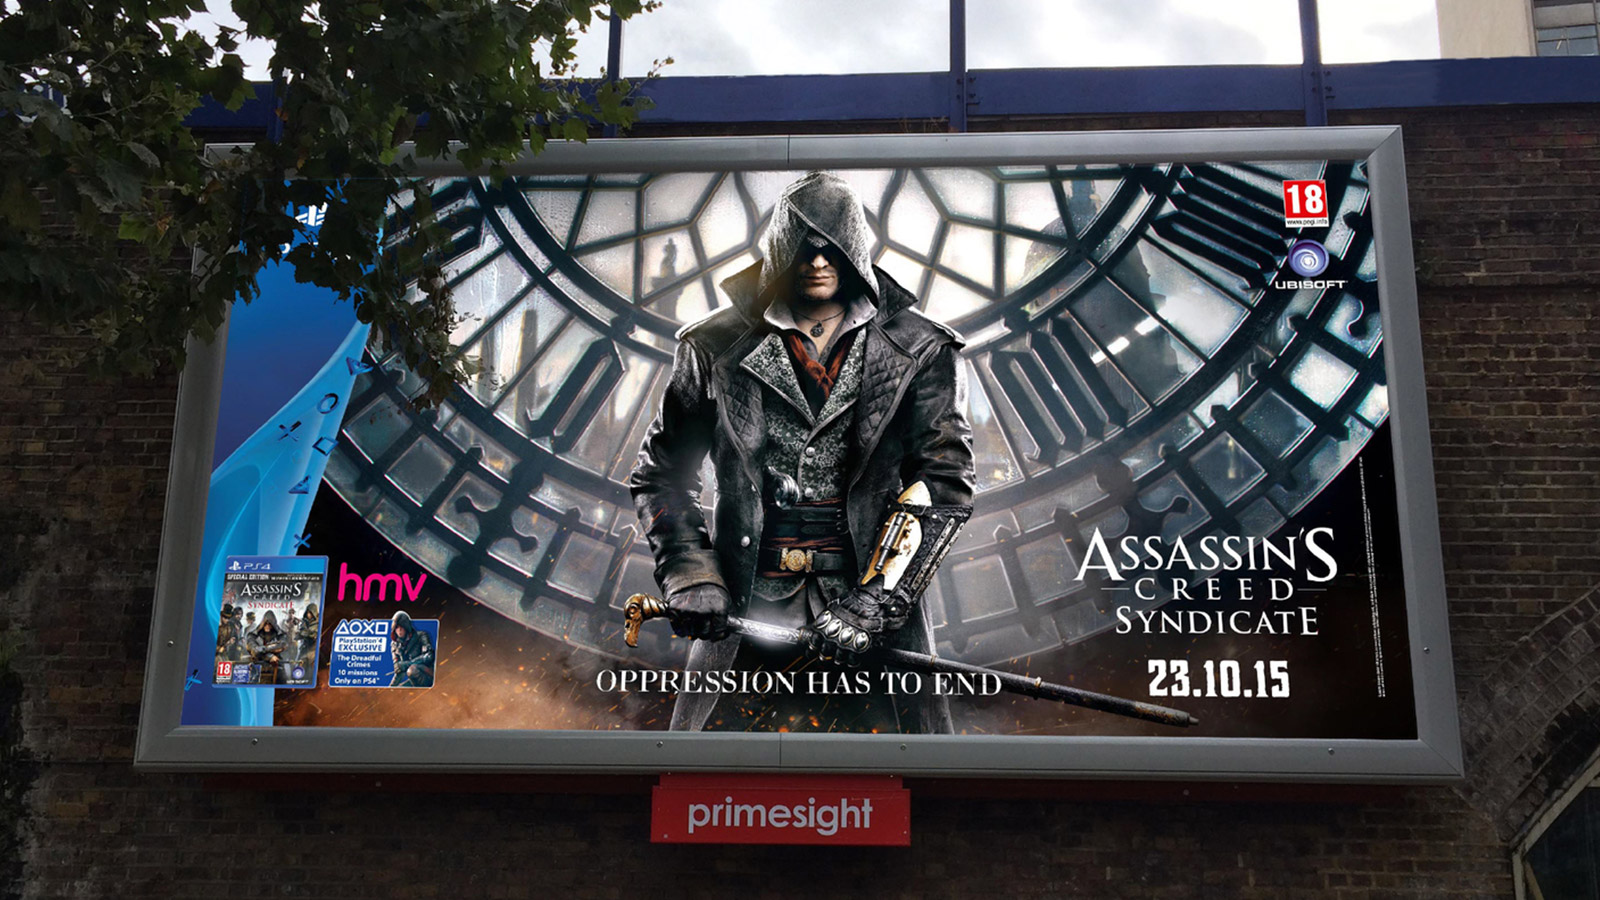 Assassins Creed Syndicate tube tunnel wrap